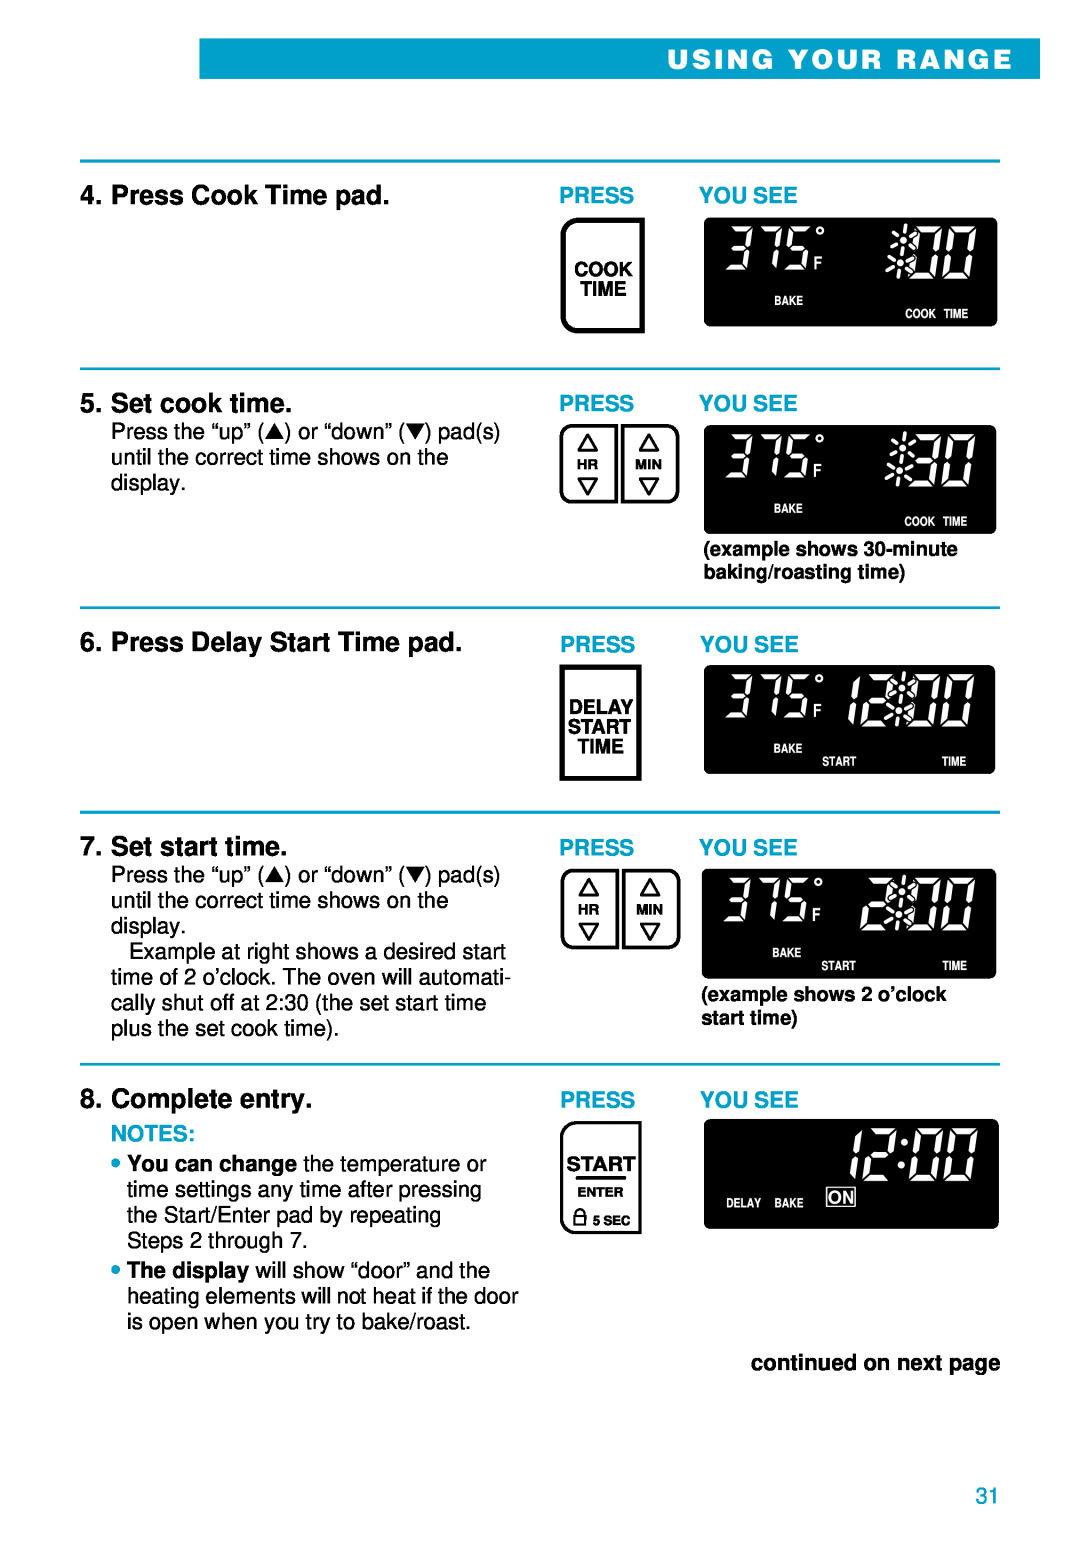 Whirlpool RS675PXE Press Delay Start Time pad, Set start time, Complete entry, Using Your Range, Press Cook Time pad 